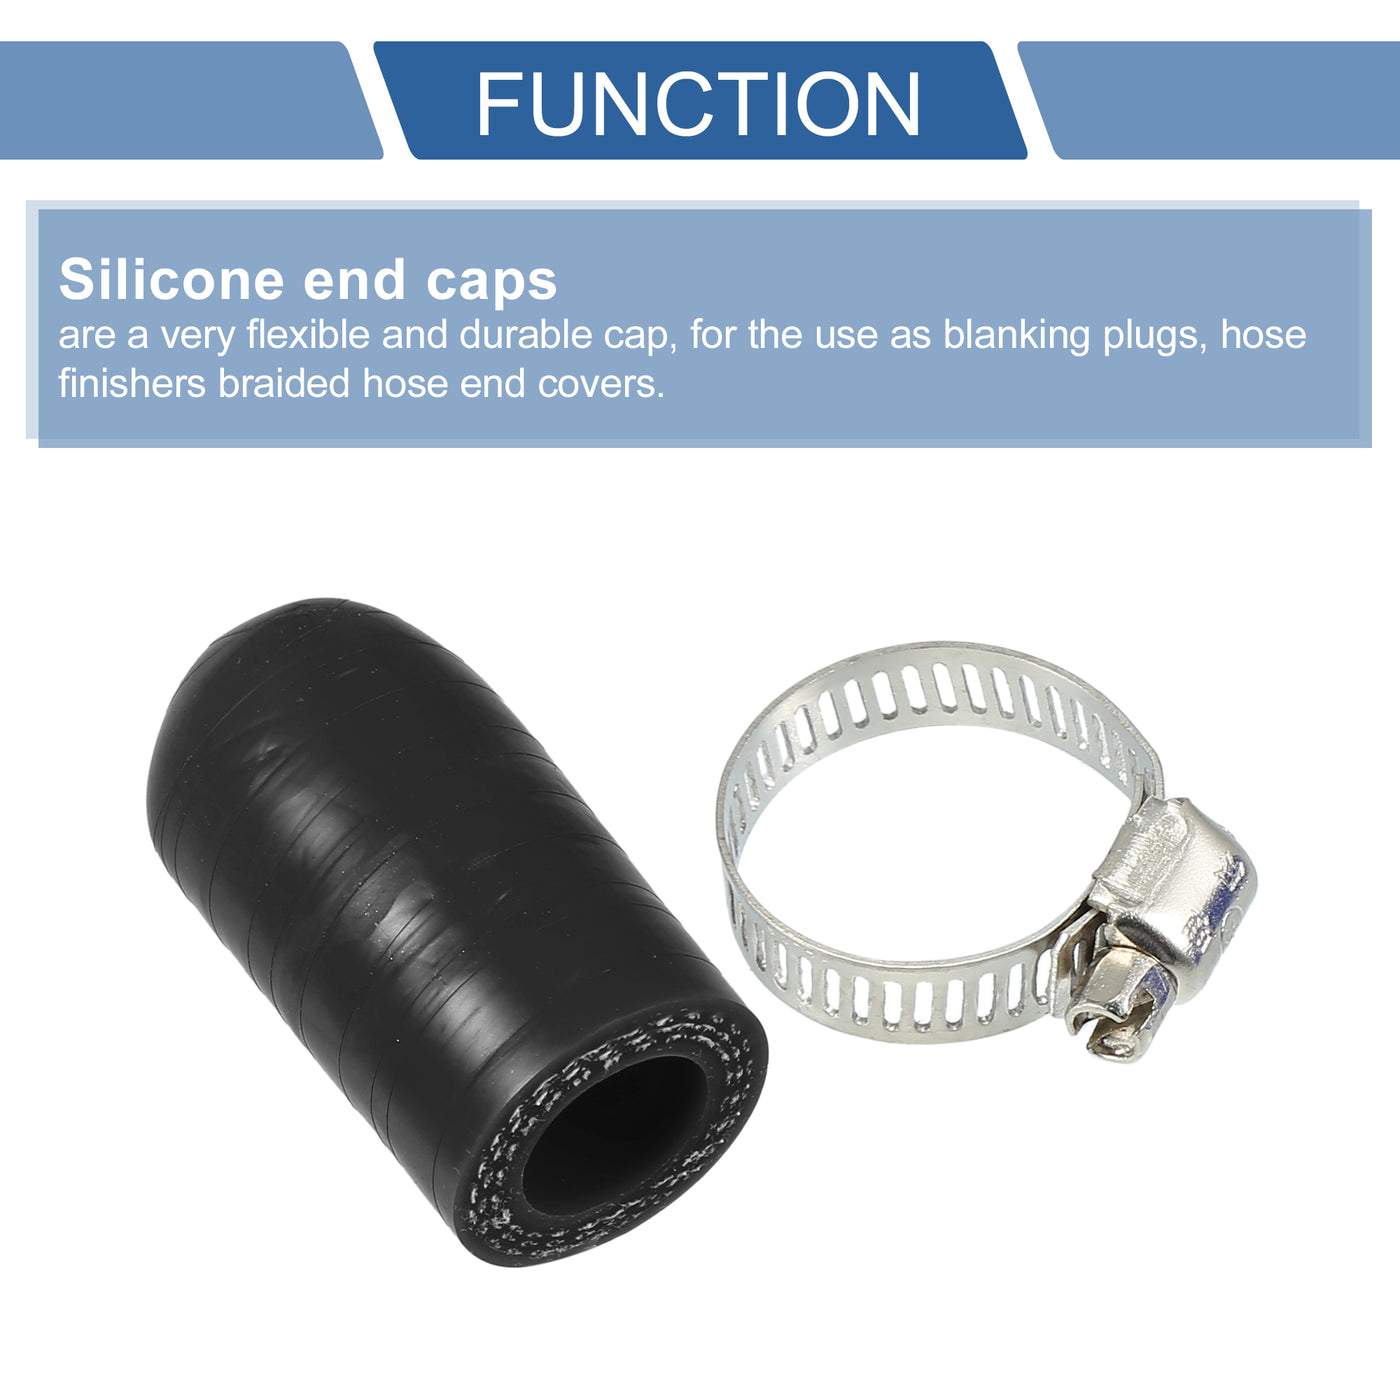 X AUTOHAUX 1 Set 30mm Length 14mm/0.55" ID Black Car Silicone Rubber Hose End Cap with Clamps Silicone Reinforced Blanking Cap for Bypass Tube Universal